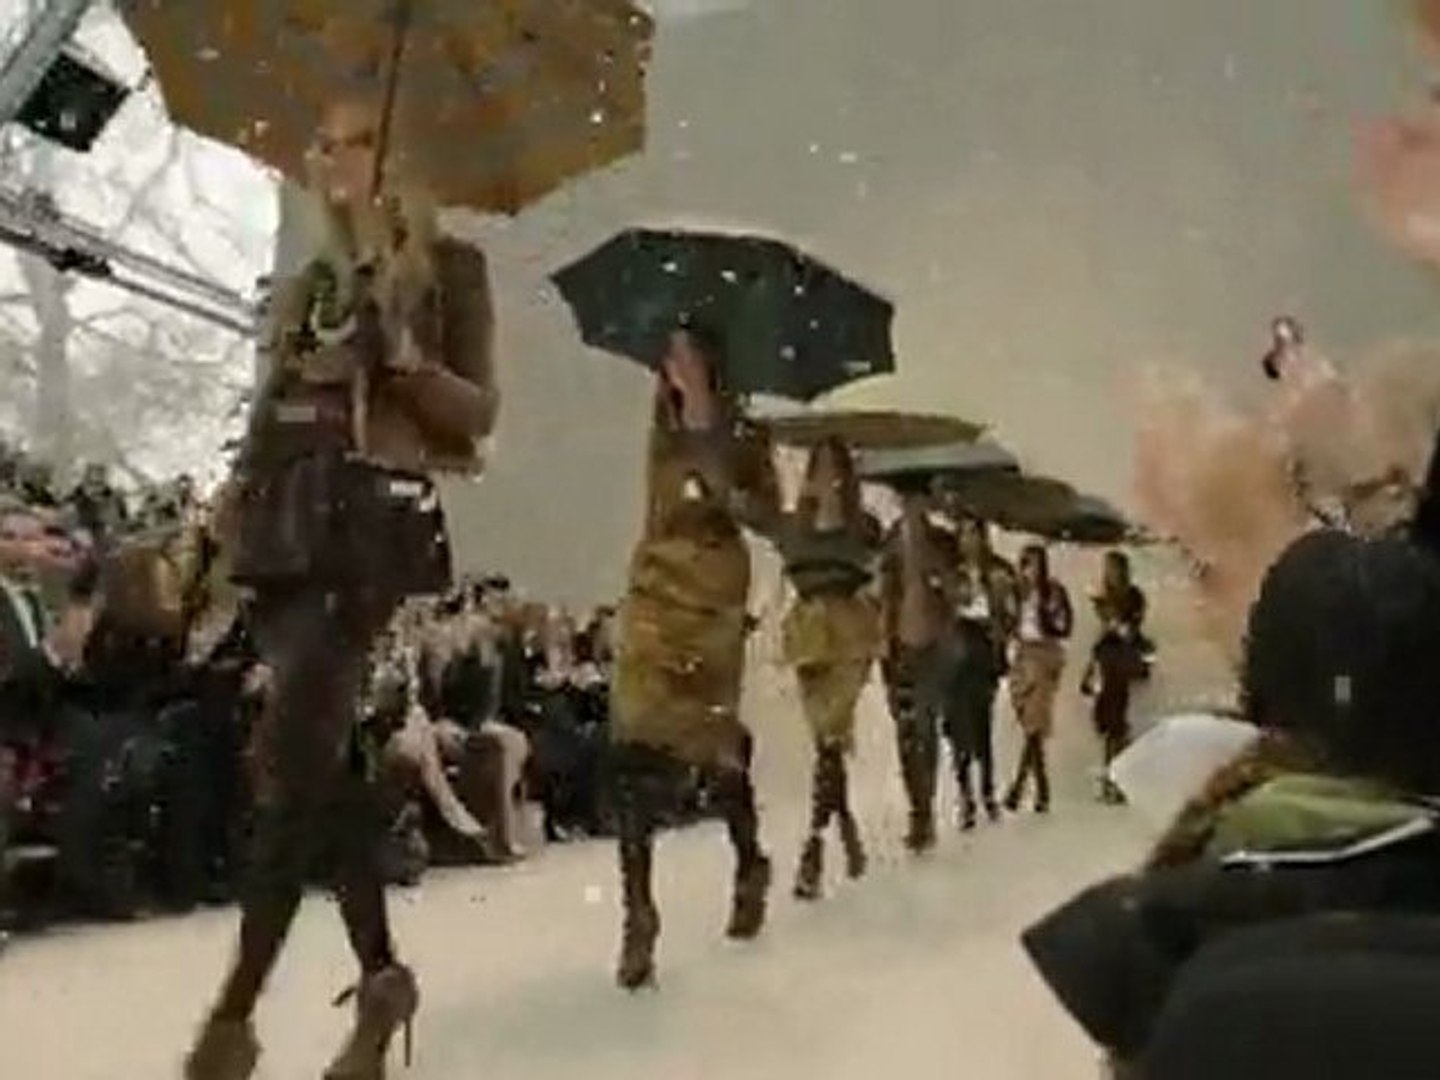 Burberry unleashes rain on its parade